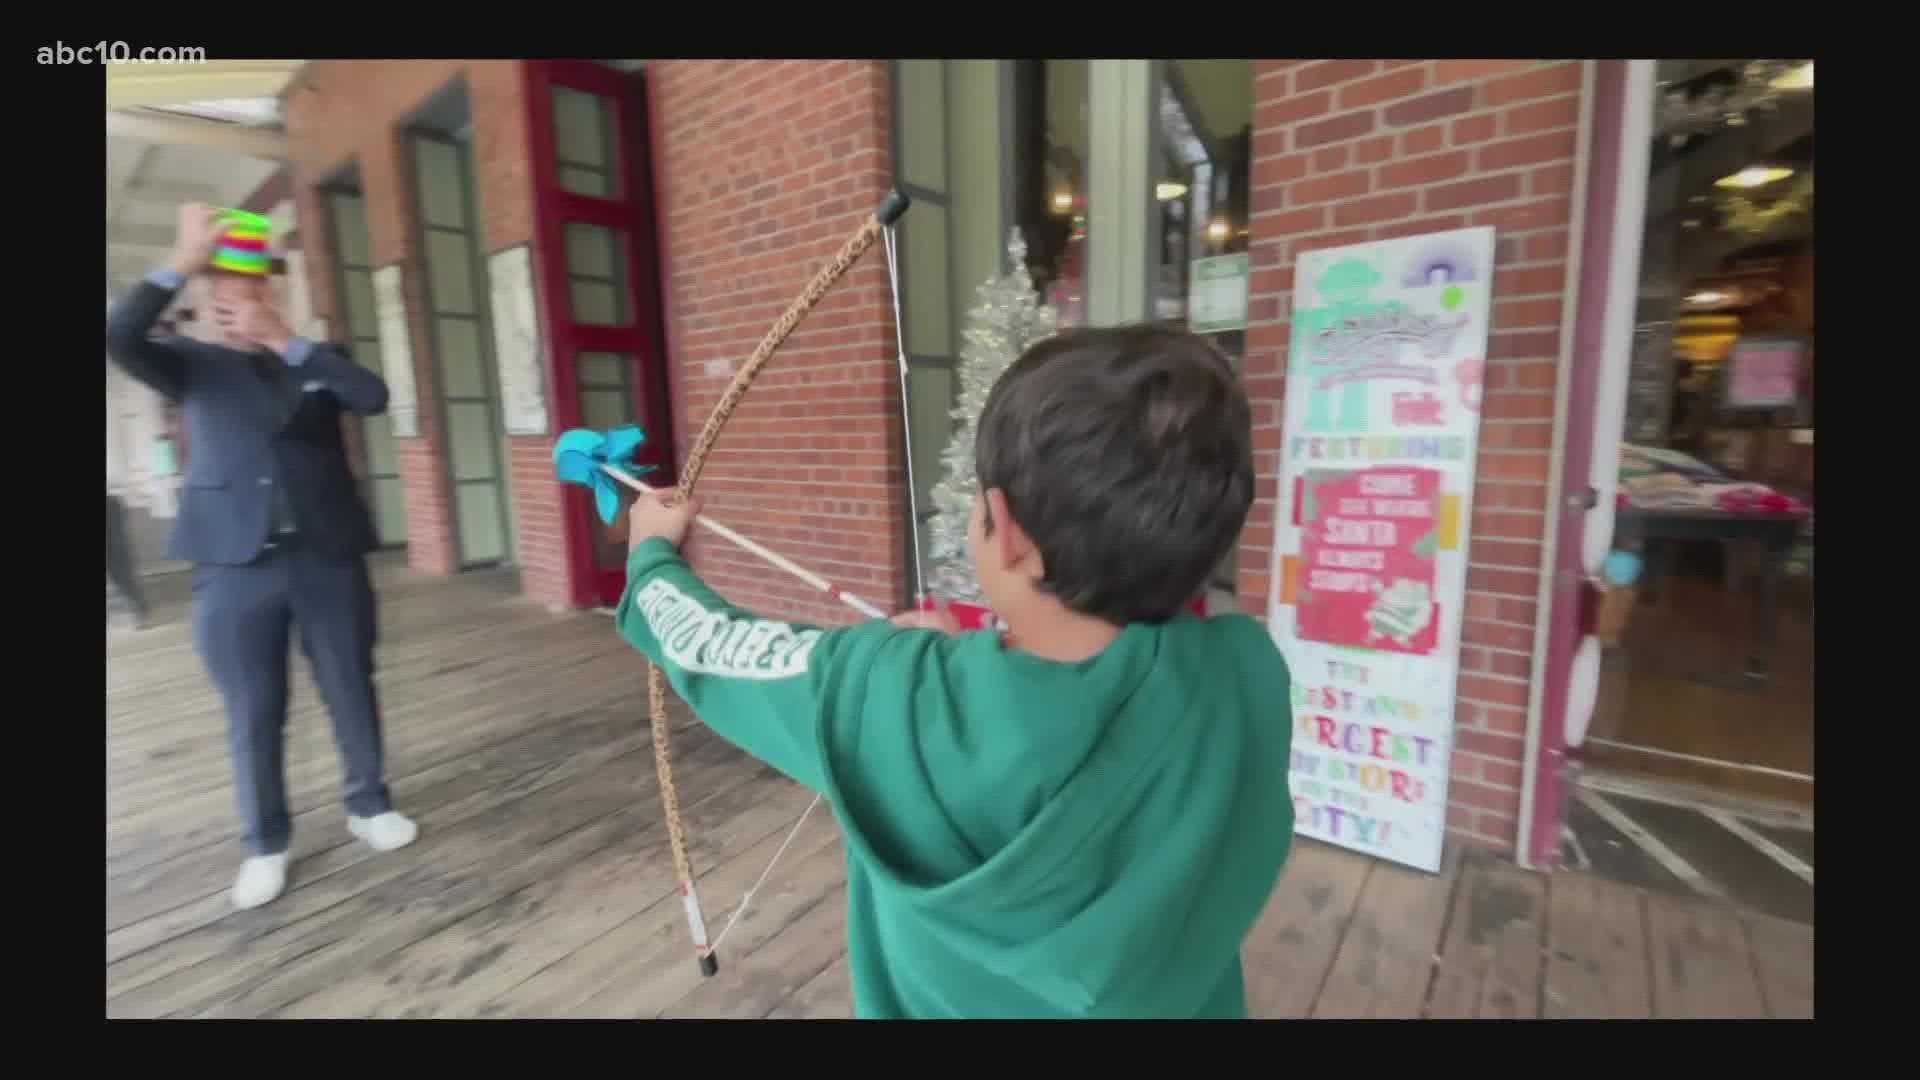 Our Mark S. Allen goes on a toy shopping spree with an 8-year-old from Elk Grove who runs his own YouTube channel, take a look at their showcase in Old Sacramento.